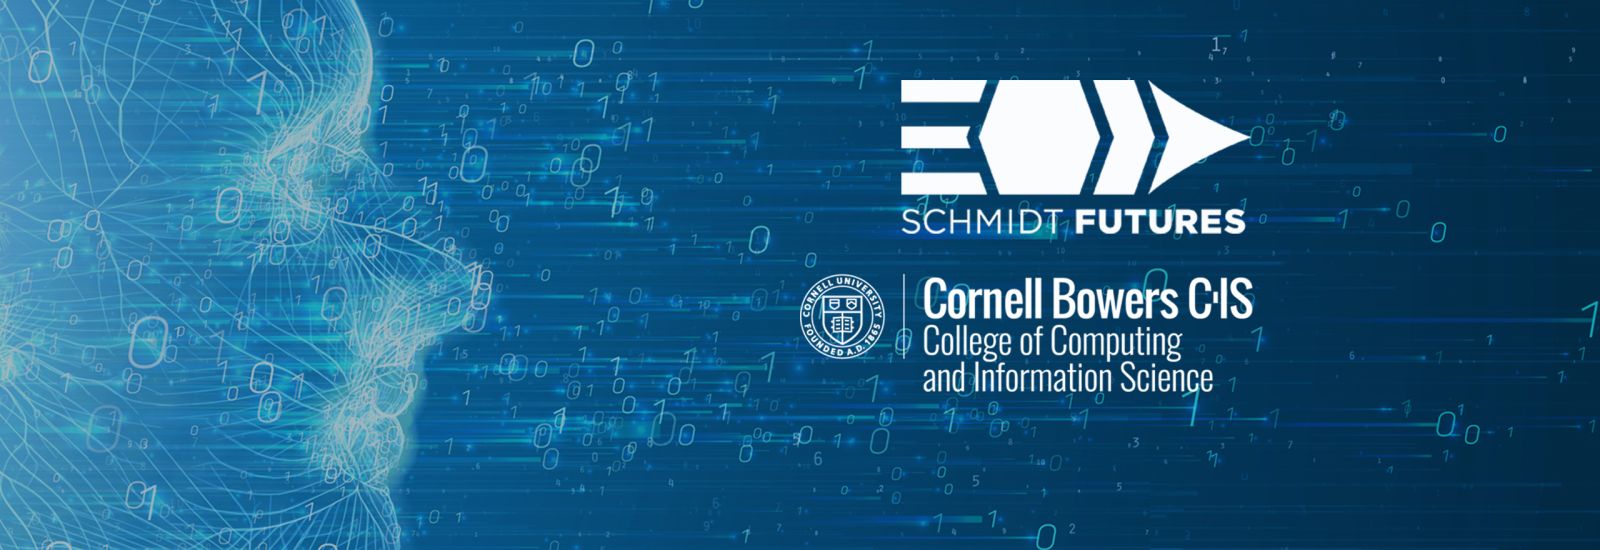 A graphic illustration with the text "Schmidt Futures" and "Cornell Bowers CIS"